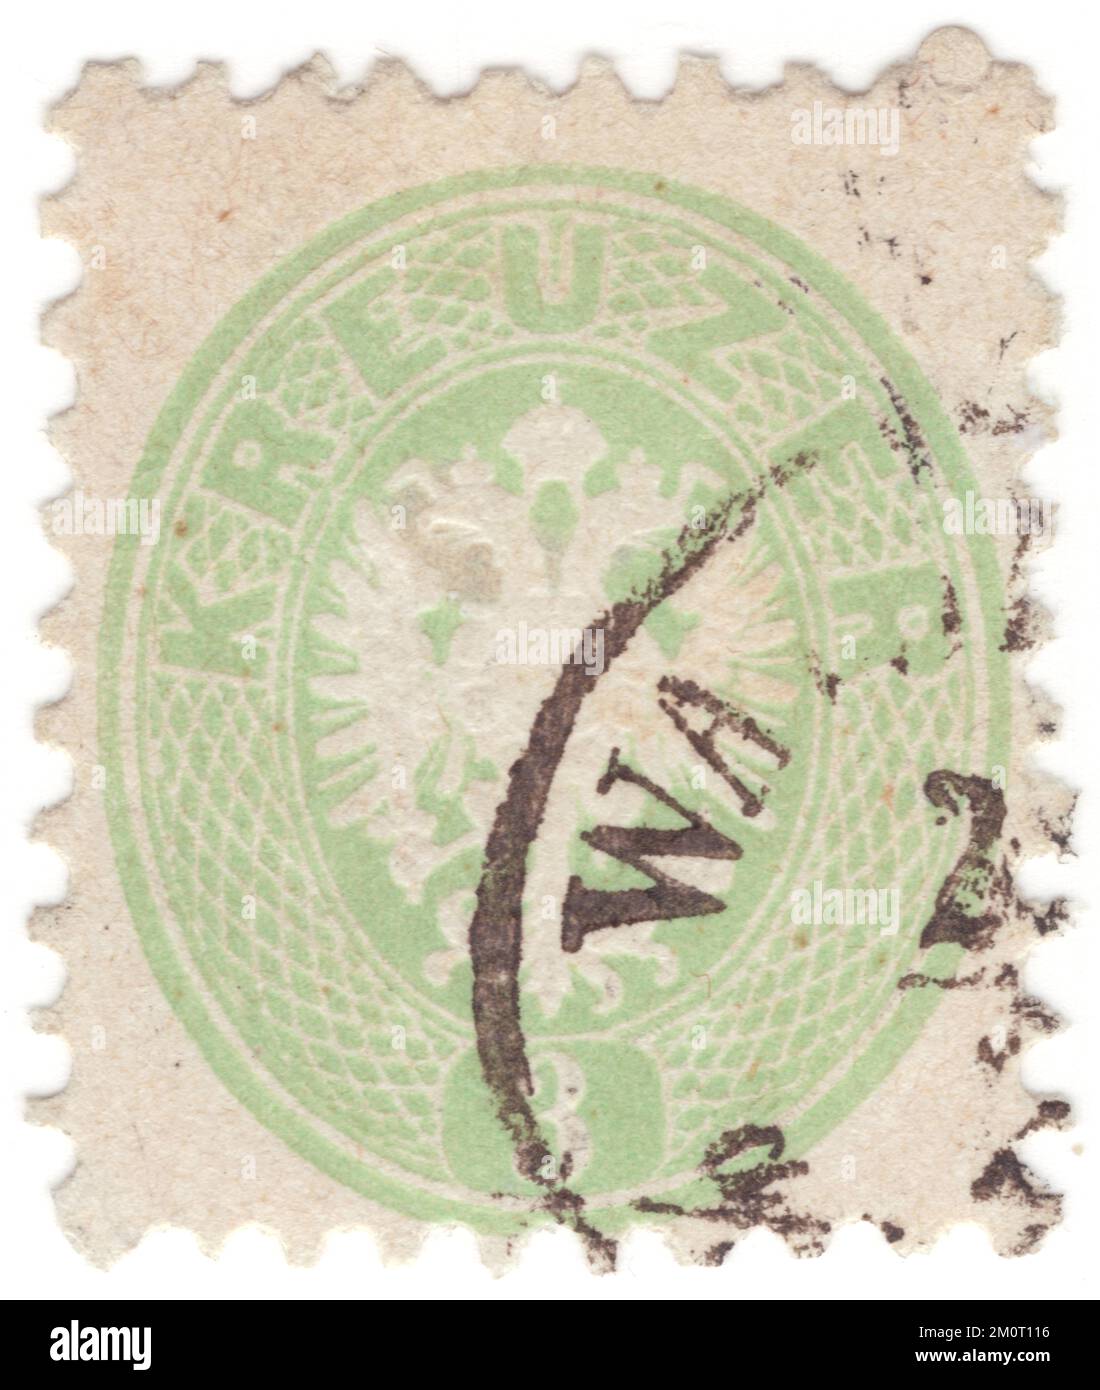 AUSTRIA — 1864: An 3 kreuzer green postage stamp depicting Coat of Arms of the Austrian monarchy. The double-headed eagle of the ruling House of Habsburg-Lorraine was used by the common Imperial and Royal (k. u. k.) institutions of Austria-Hungary or the dual monarchy. double-headed eagle (or double-eagle) is a charge associated with the concept of Empire. Most modern uses of the symbol are directly or indirectly associated with its use by the late Byzantine Empire, originally a dynastic emblem of the Palaiologoi Stock Photo